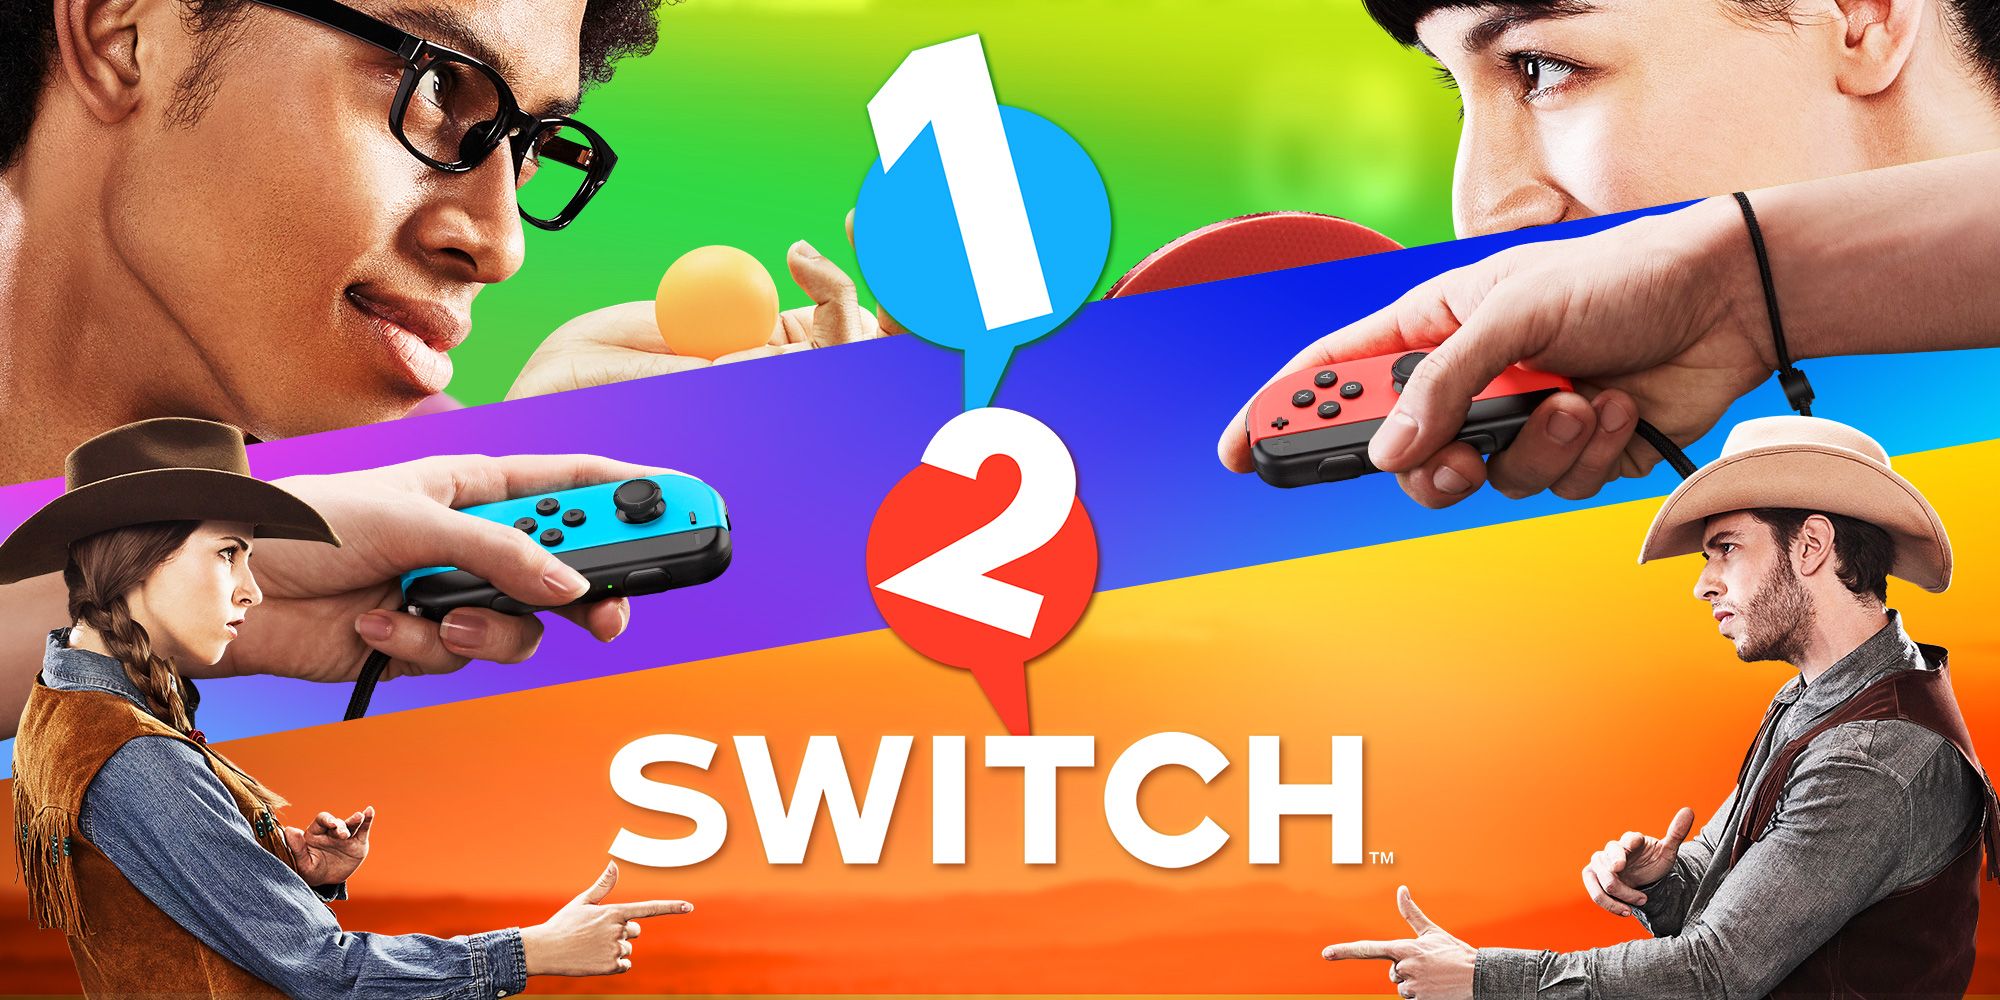 1-2 Switch Game for Nintendo Switch